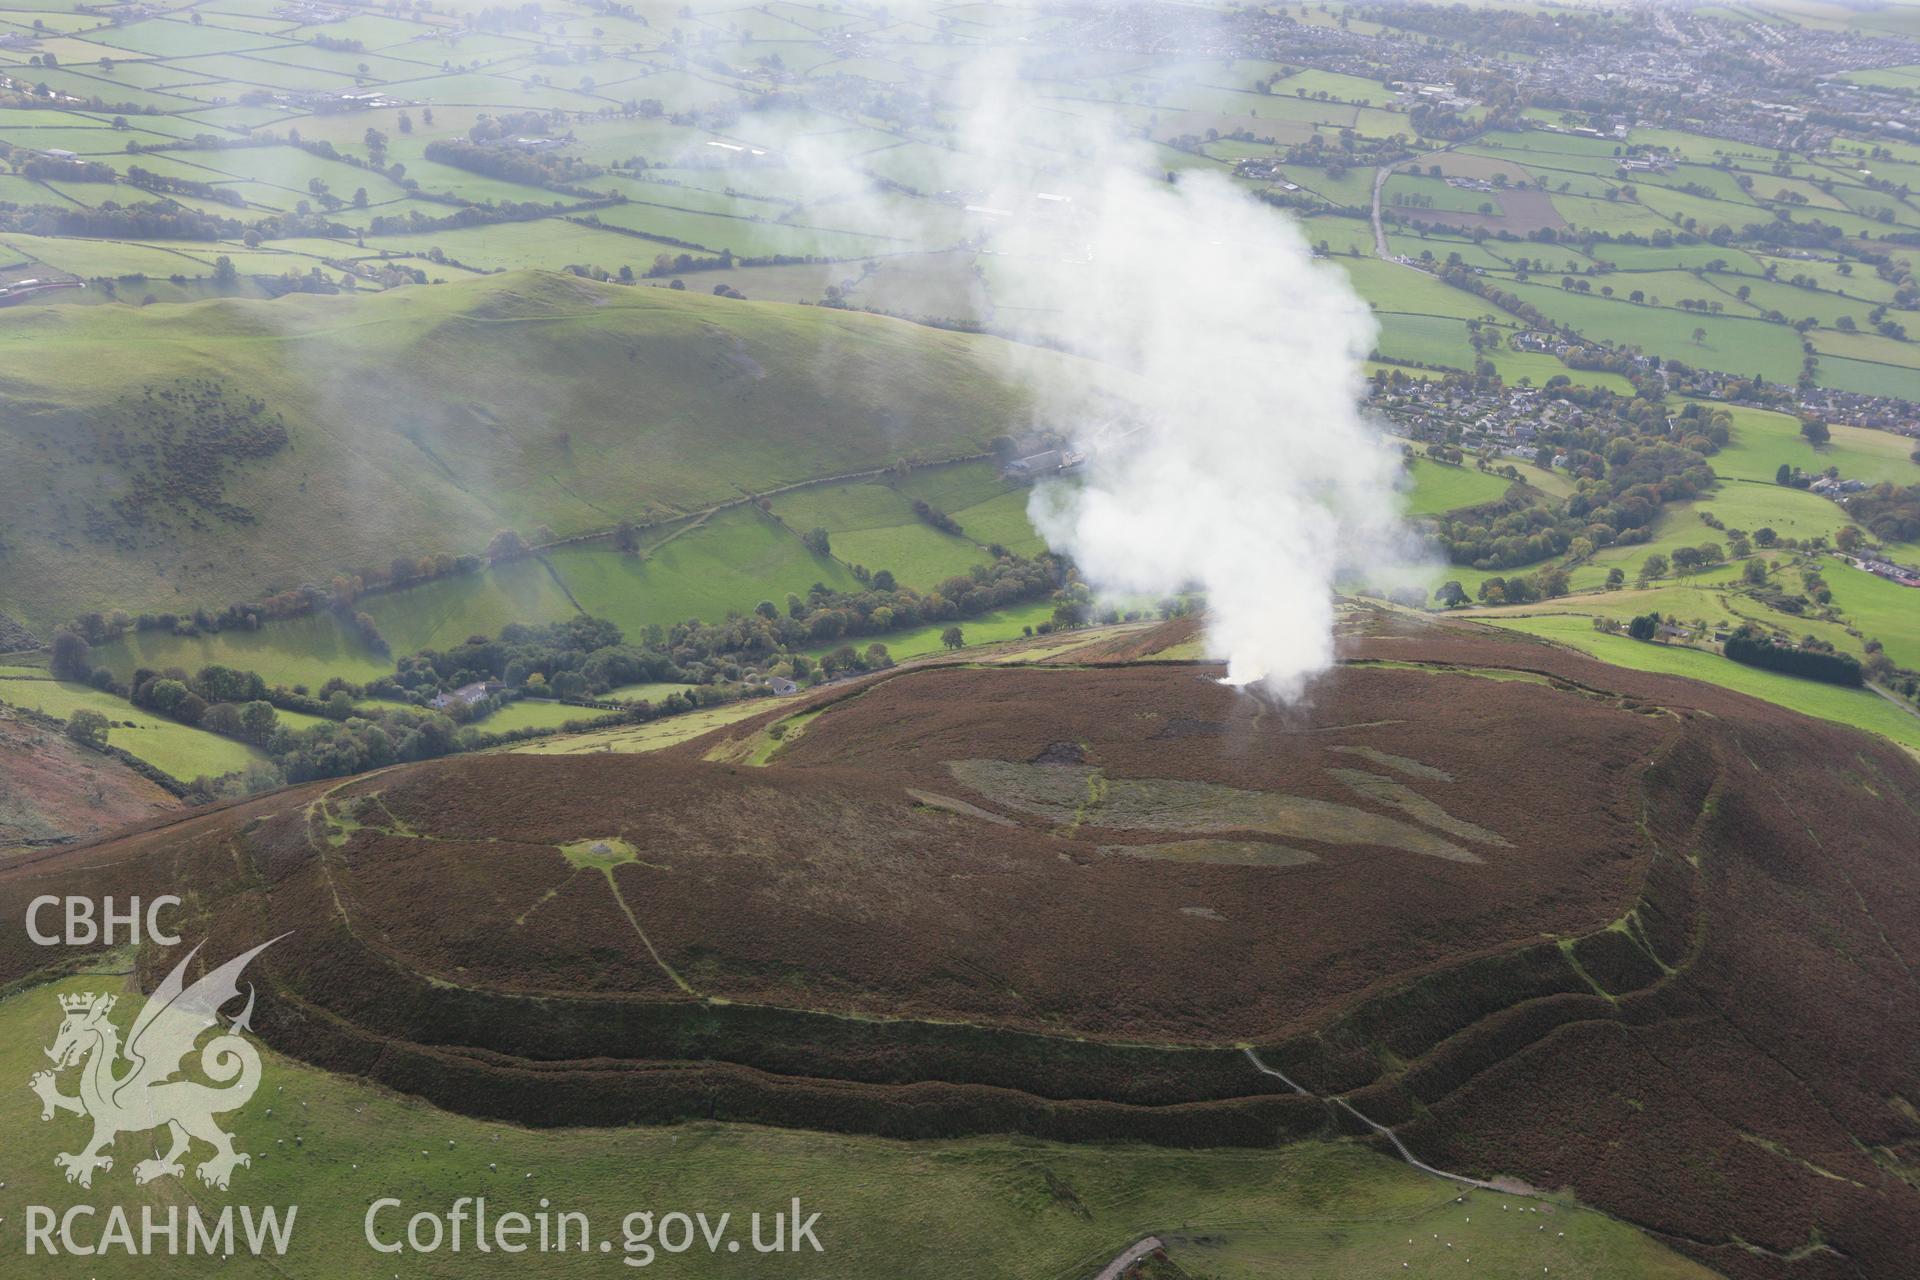 RCAHMW colour oblique aerial photograph of Foel Fenlli Hillfort showing a controlled heather burn. Taken on 13 October 2009 by Toby Driver